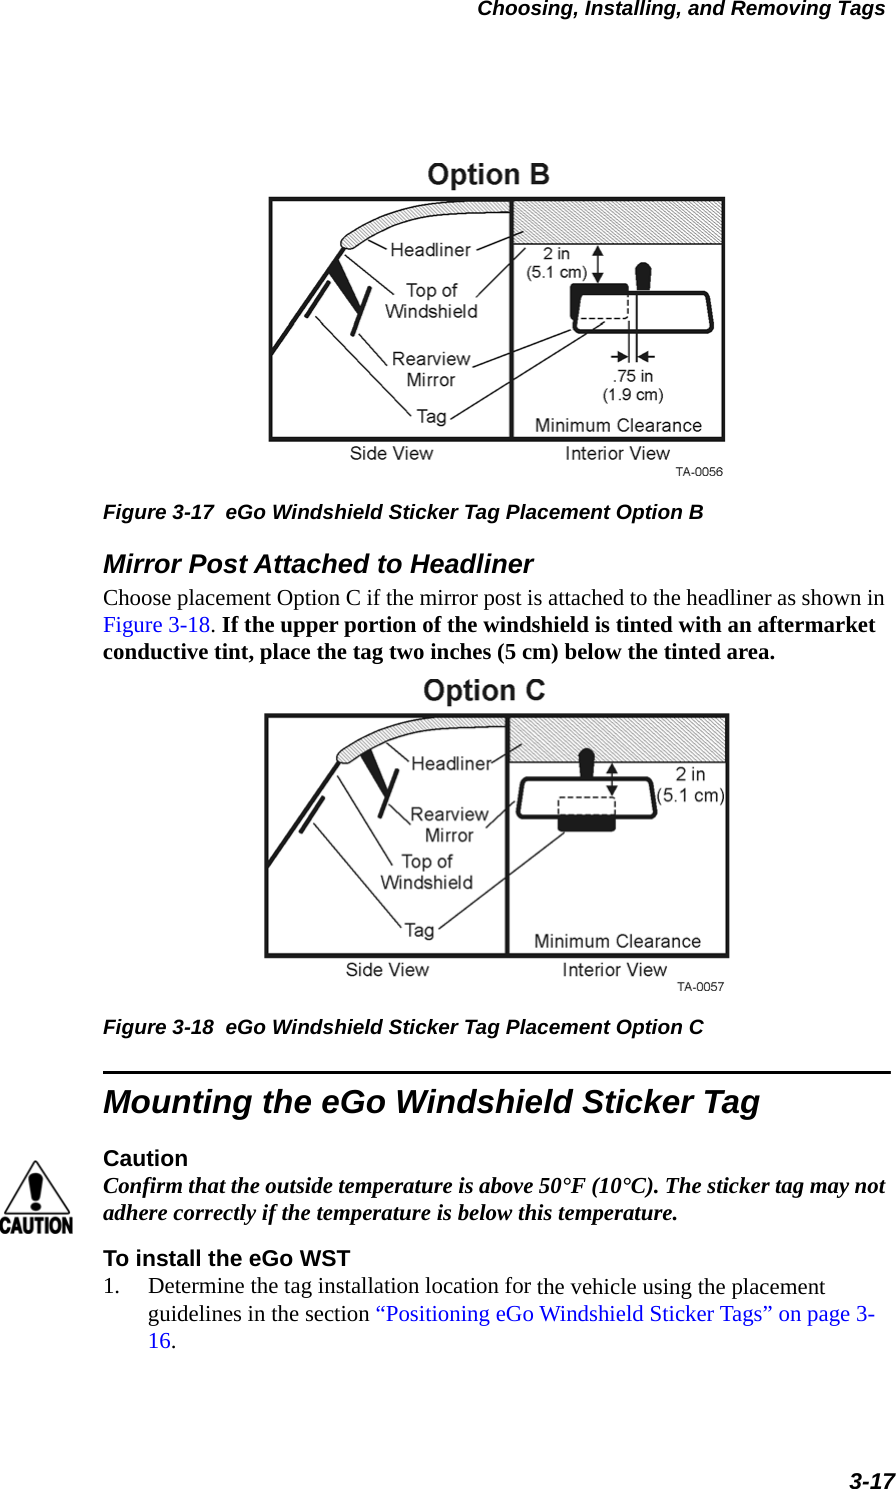 Choosing, Installing, and Removing Tags3-17Figure 3-17  eGo Windshield Sticker Tag Placement Option BMirror Post Attached to HeadlinerChoose placement Option C if the mirror post is attached to the headliner as shown in Figure 3-18. If the upper portion of the windshield is tinted with an aftermarket conductive tint, place the tag two inches (5 cm) below the tinted area. Figure 3-18  eGo Windshield Sticker Tag Placement Option CMounting the eGo Windshield Sticker TagCautionConfirm that the outside temperature is above 50°F (10°C). The sticker tag may not adhere correctly if the temperature is below this temperature.To install the eGo WST1. Determine the tag installation location for the vehicle using the placement guidelines in the section “Positioning eGo Windshield Sticker Tags” on page 3-16.